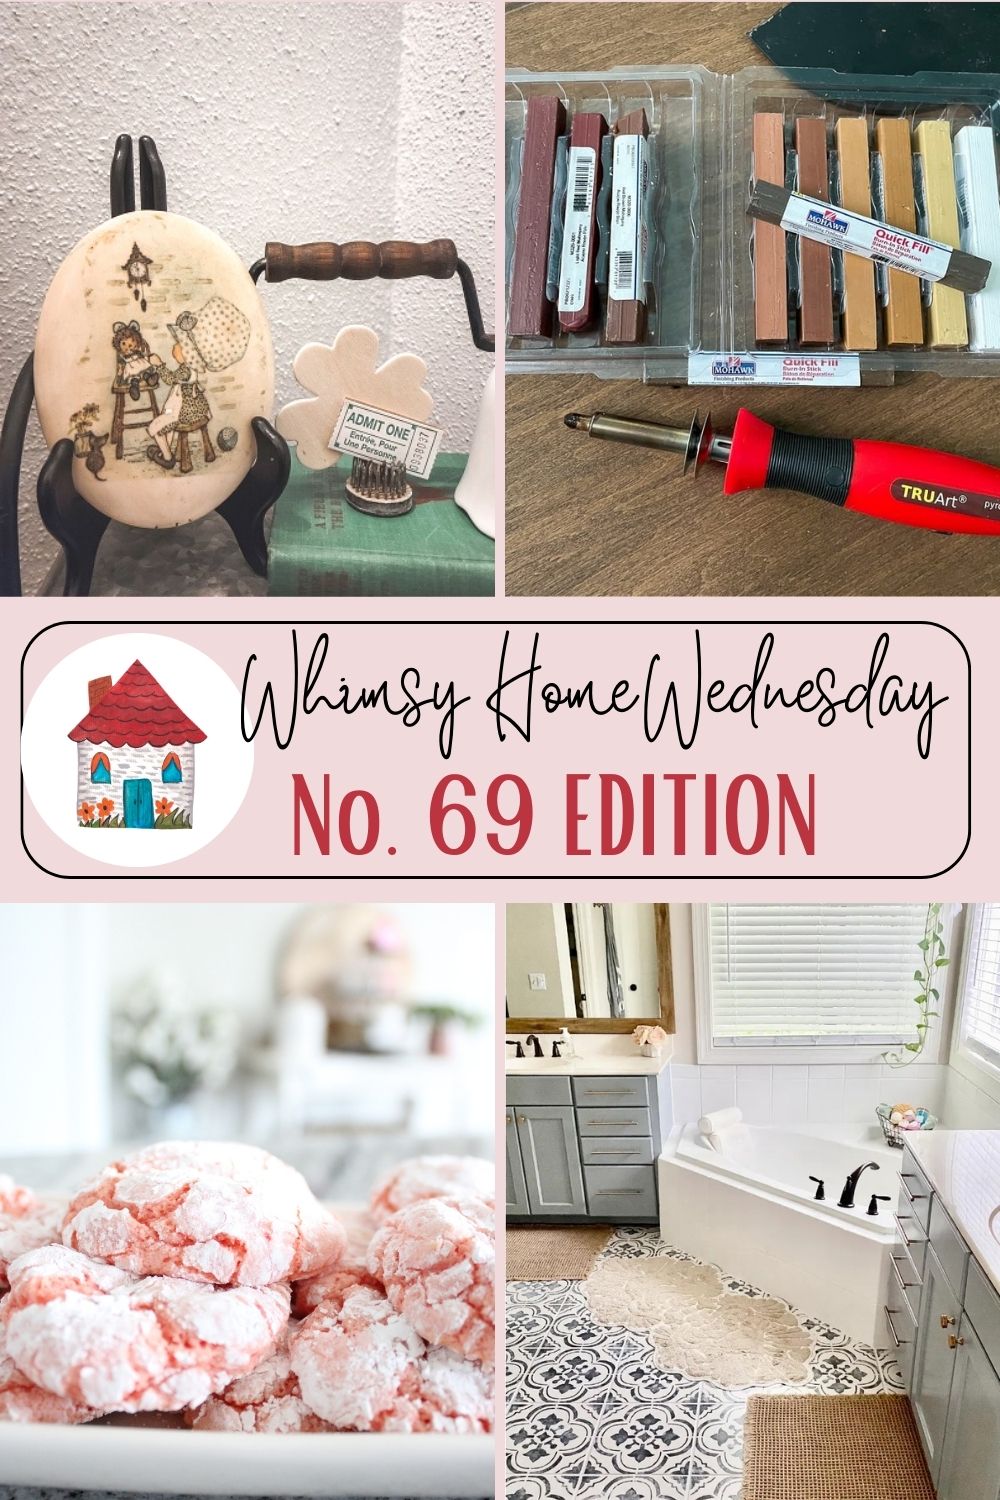 Whimsy Home Wednesday Blog Link Party No. 69